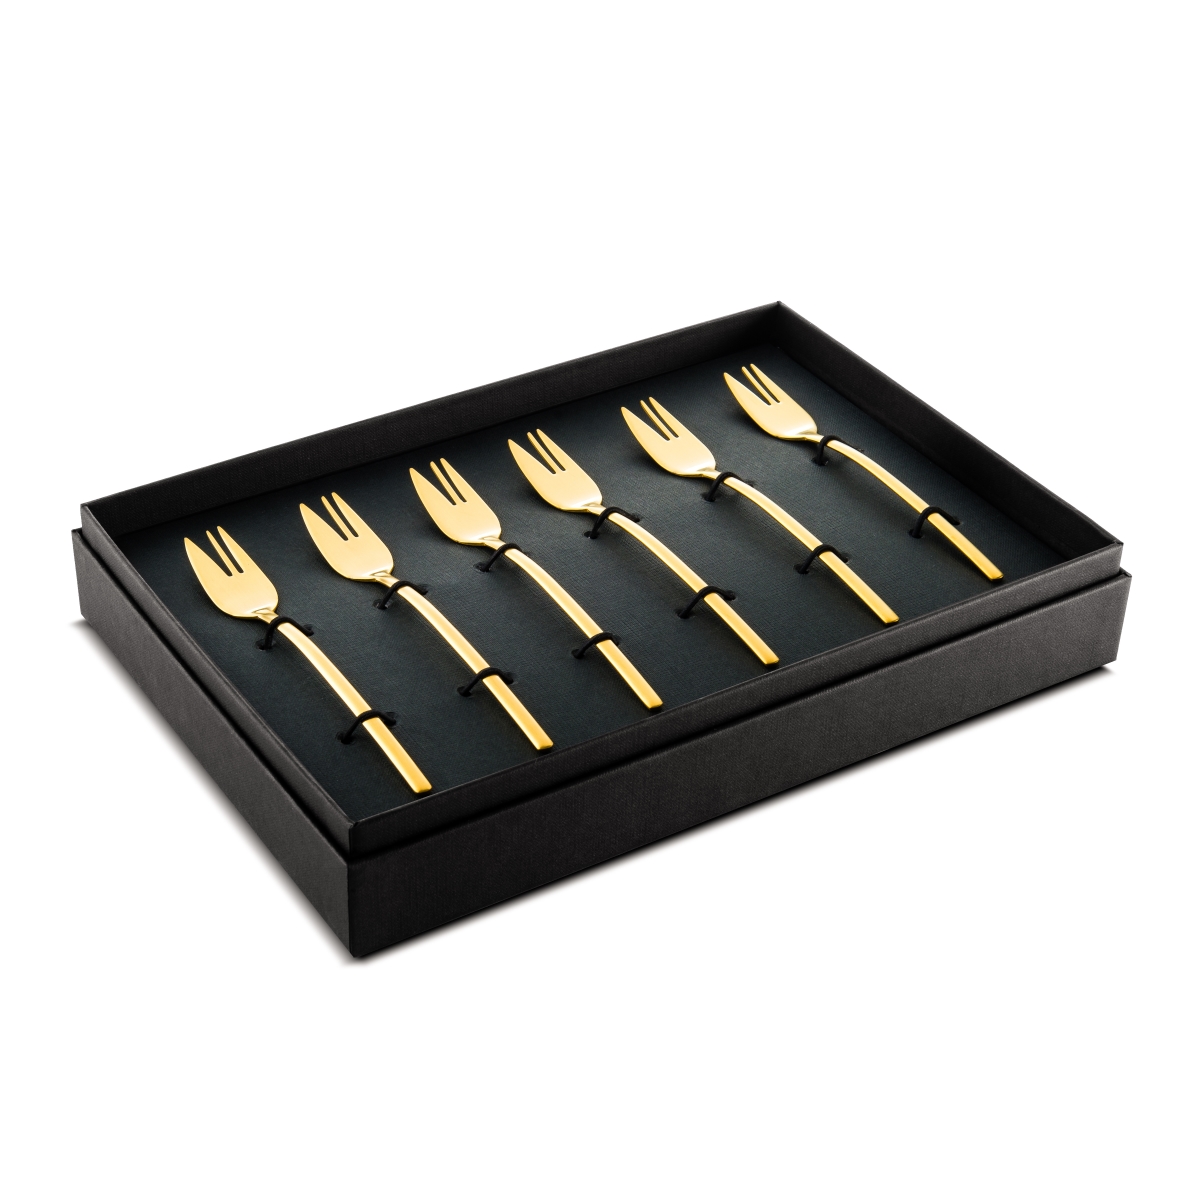 Picture of Mepra 108044115 Due Ice Oro - Cake Fork Set - 6 Piece